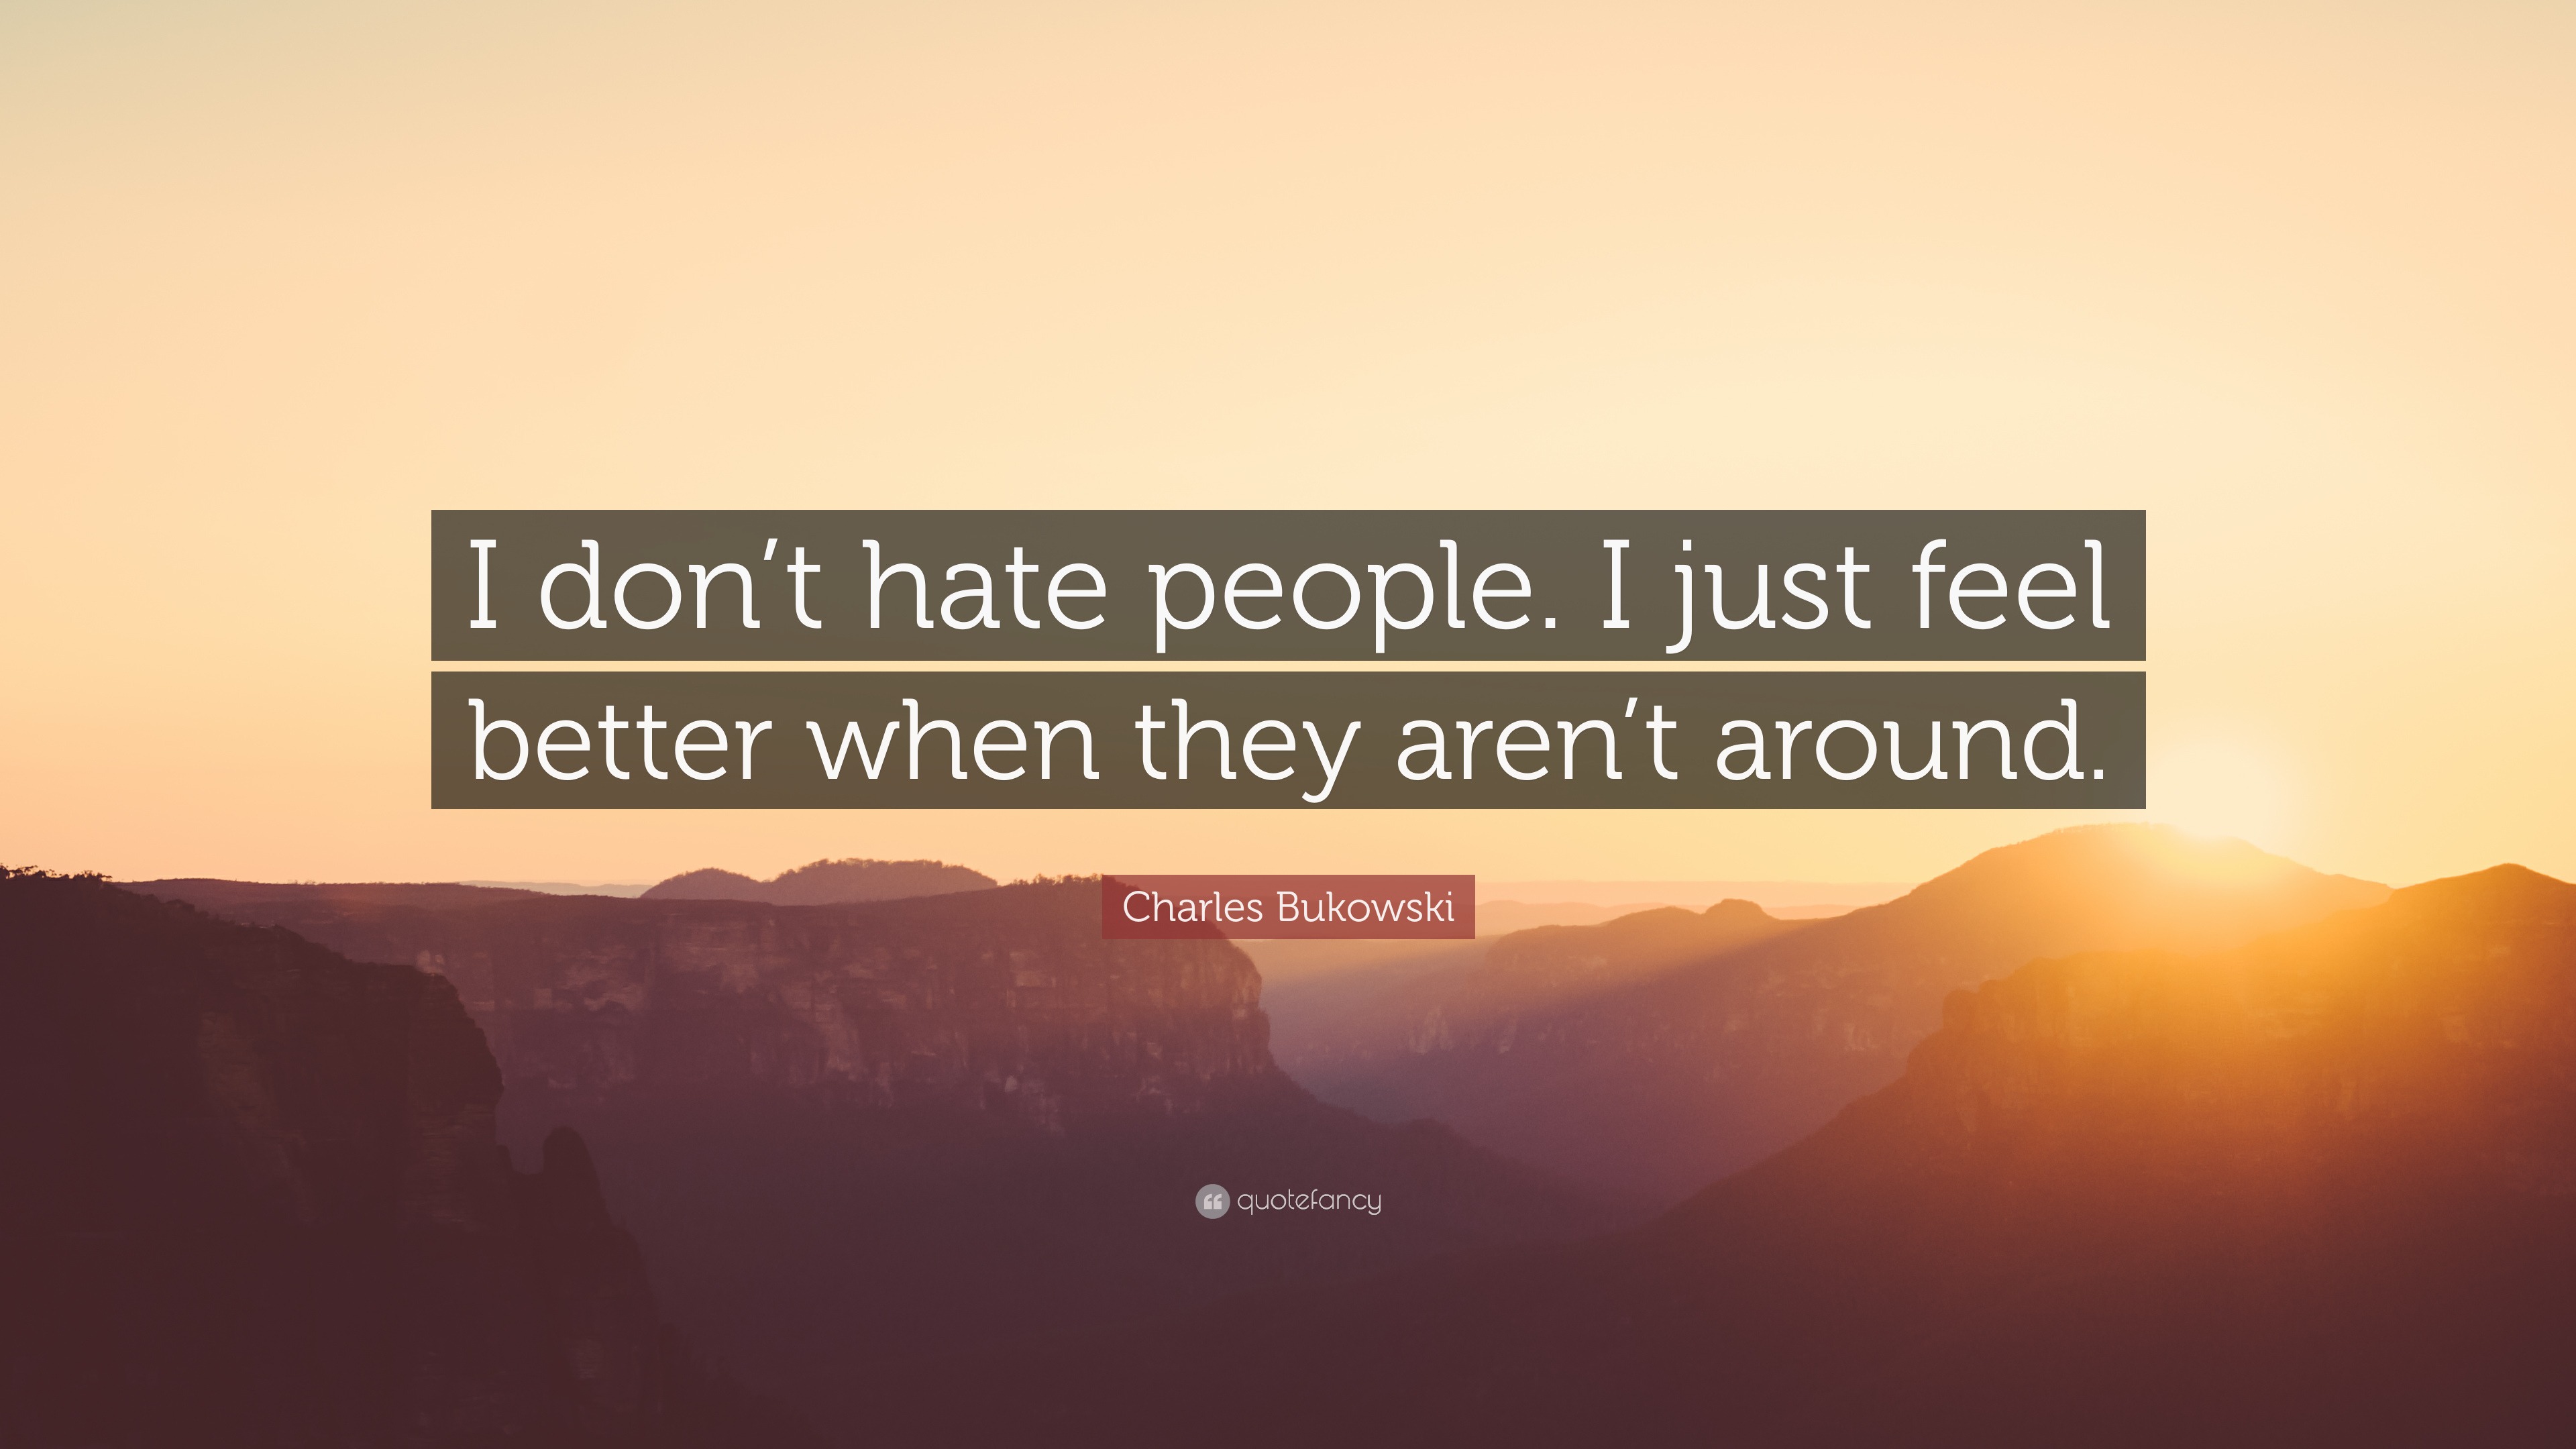 Charles Bukowski Quote: “I don't hate people. I just feel better when they  aren't